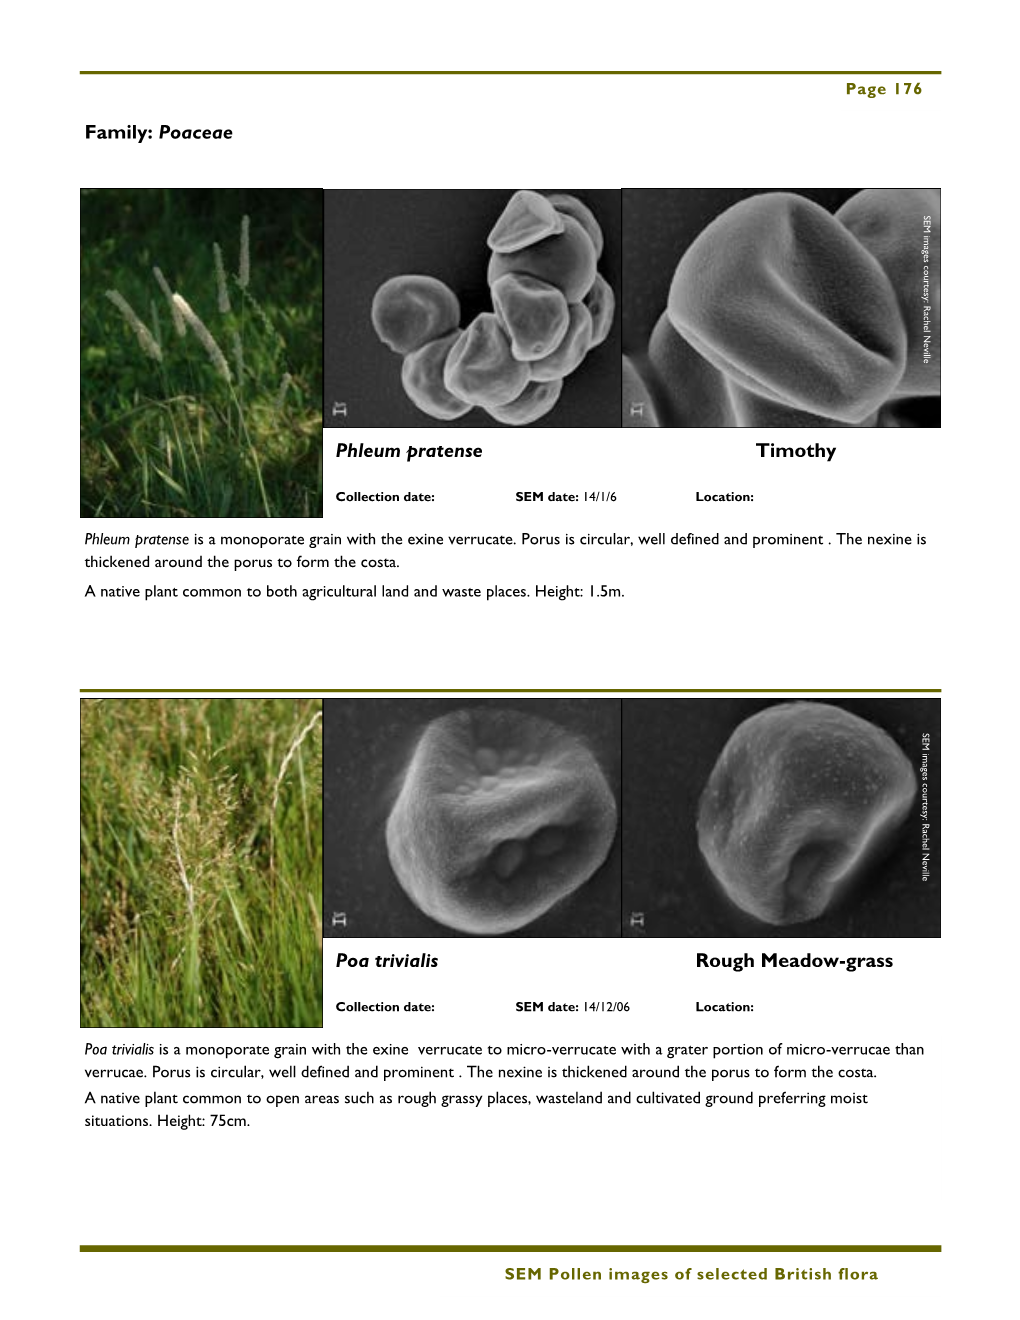 Pollen Images of Selected British Flora: Part 3